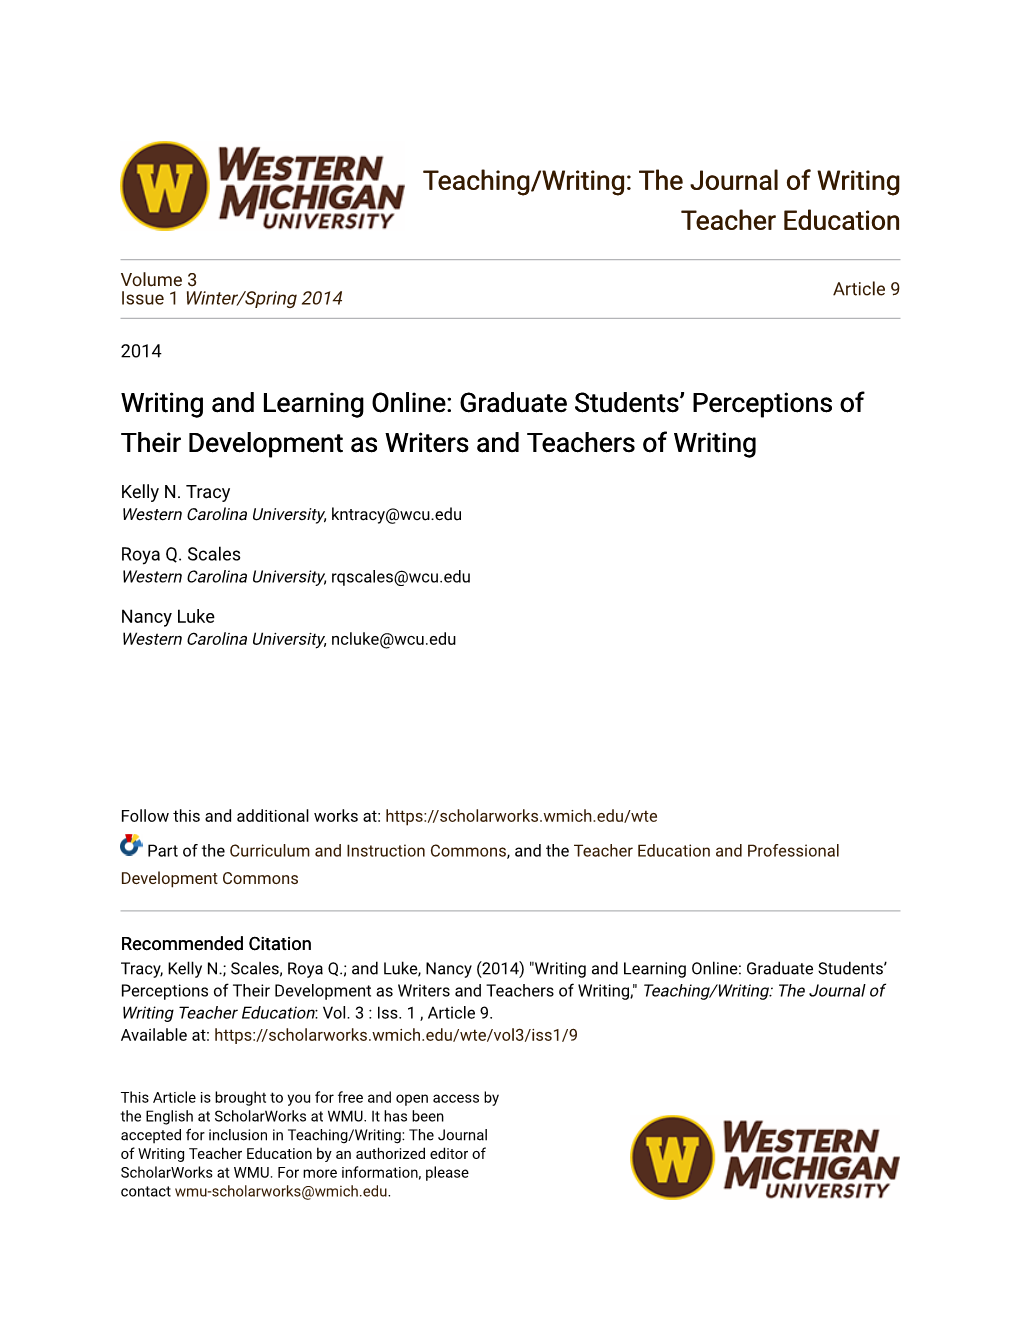 Graduate Students' Perceptions of Their Development As Writers and Teachers of Writing